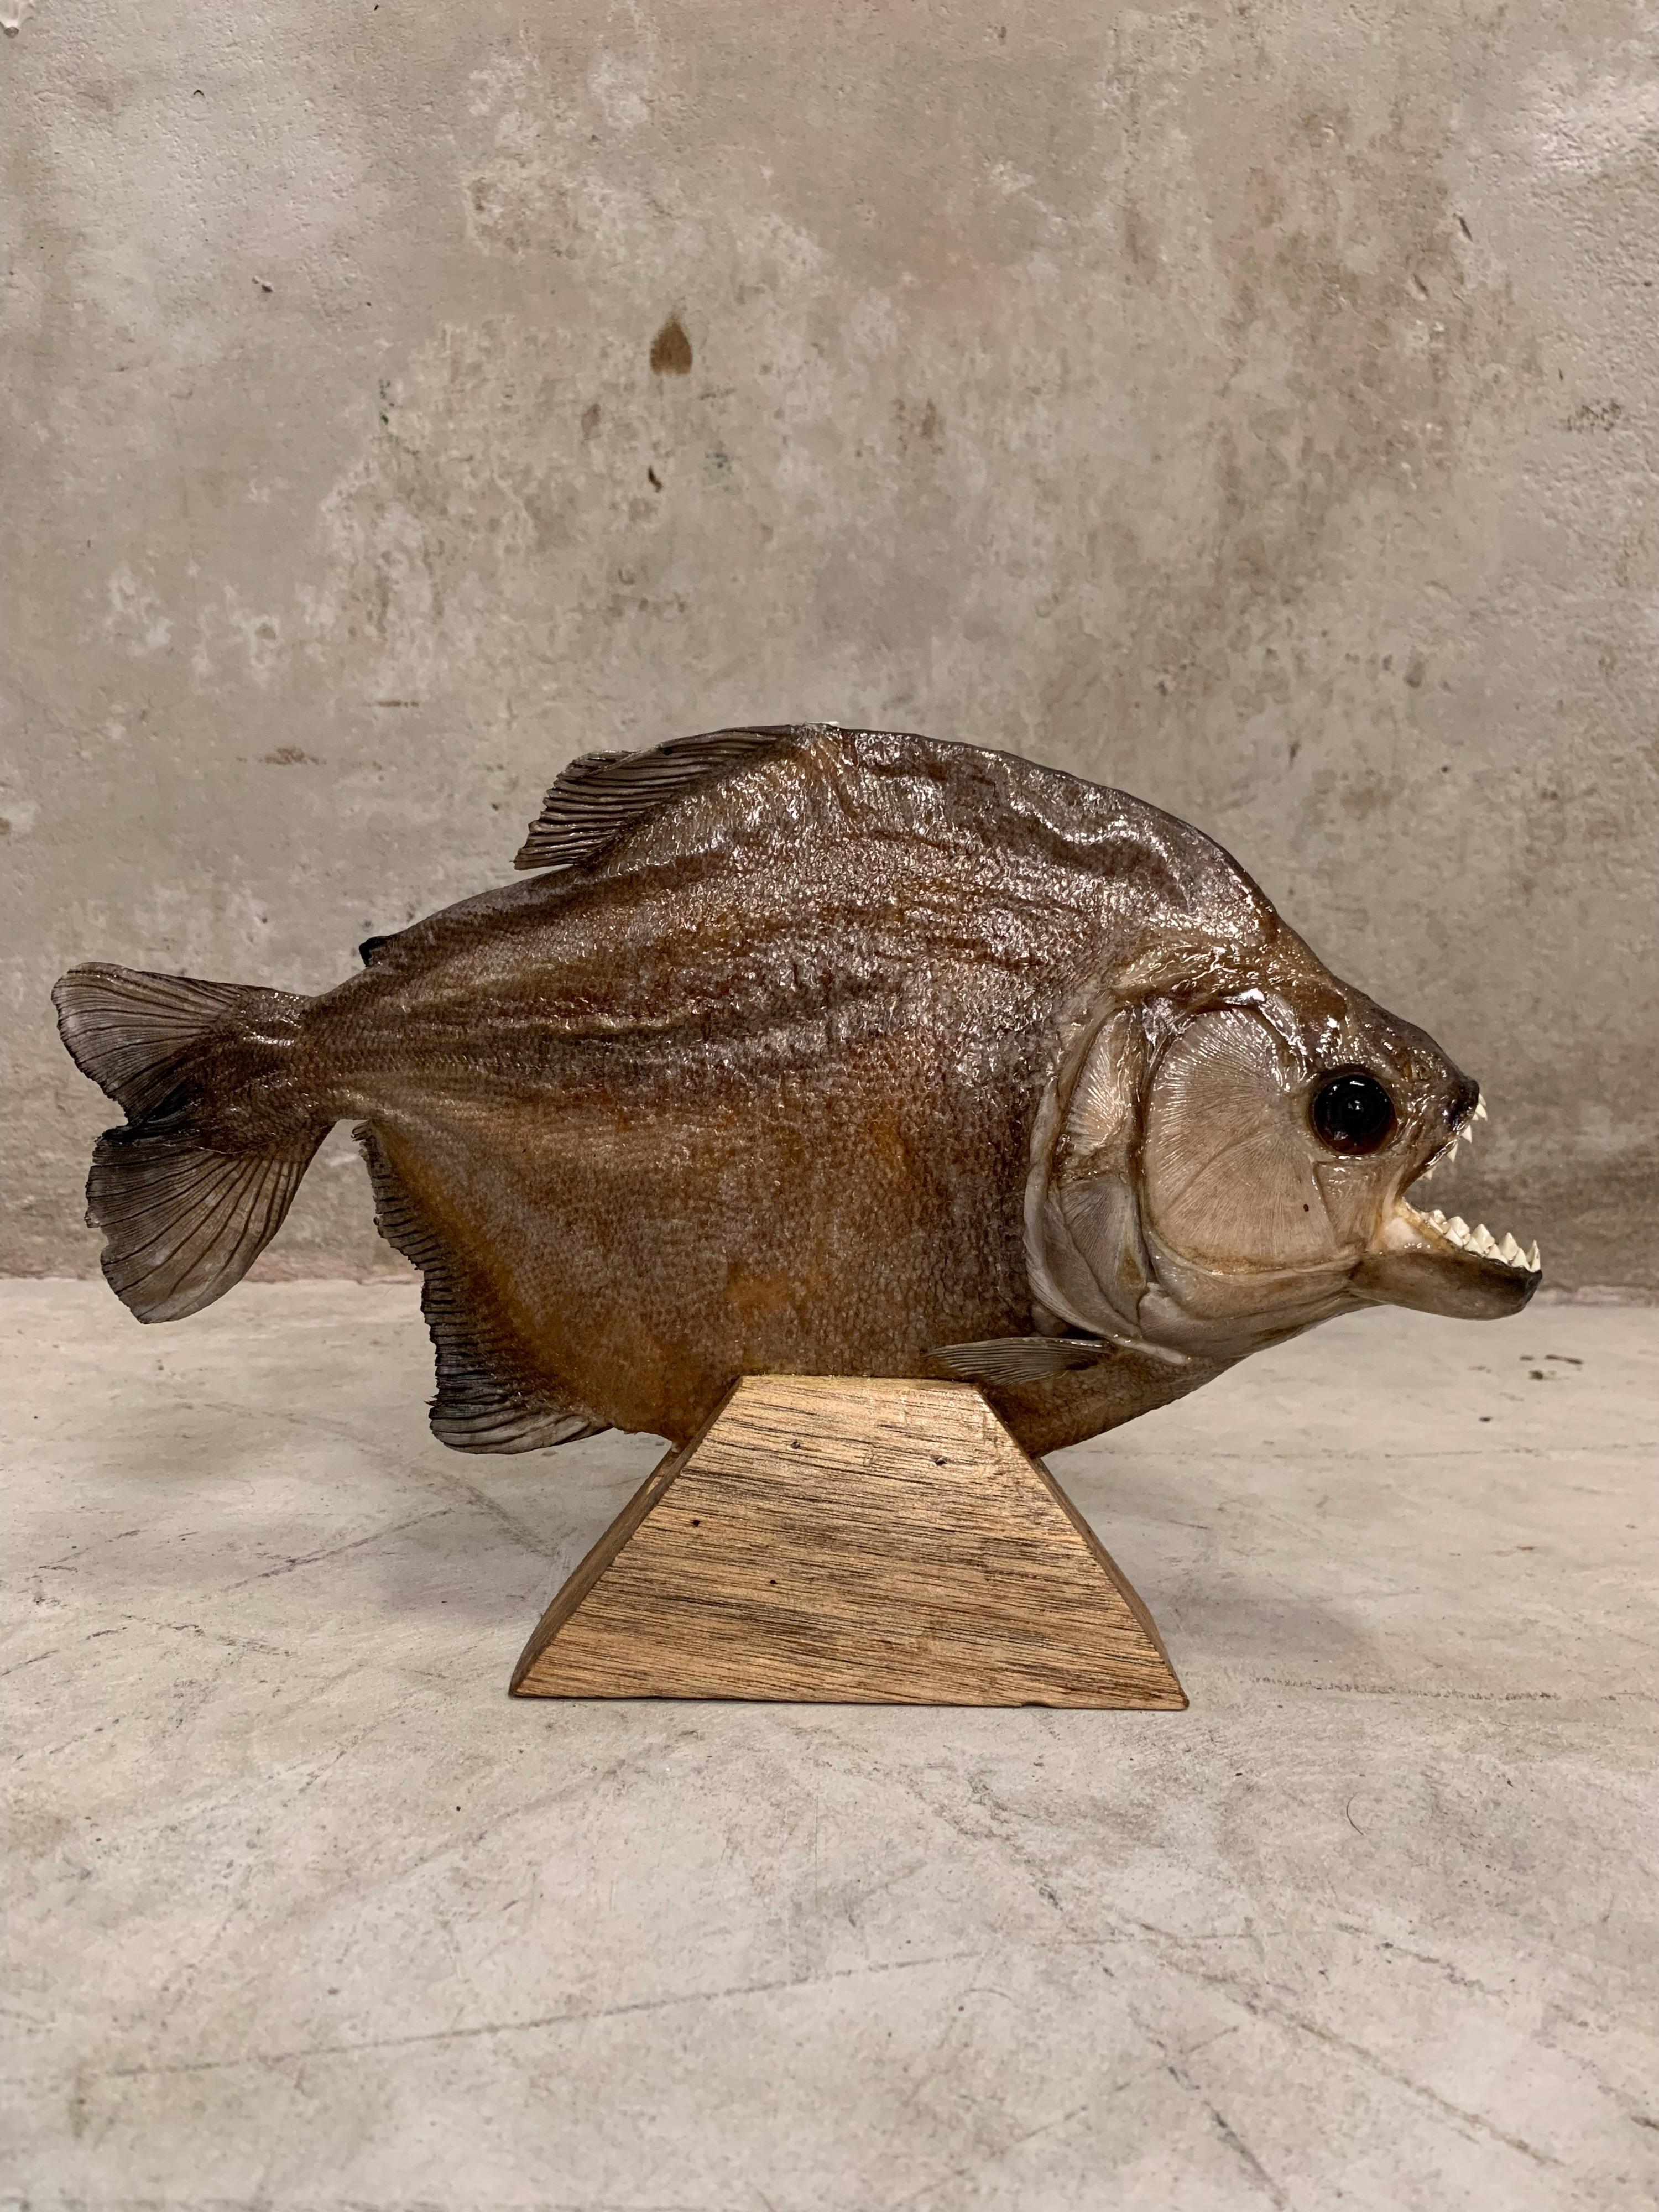 Beautifully prepared large Piranha on a hardwood stand. The details are stunning, especially the mouth with a full set of razorsharp teeth. The fish itself is 31.5 cm long! Was caught in Brazil.